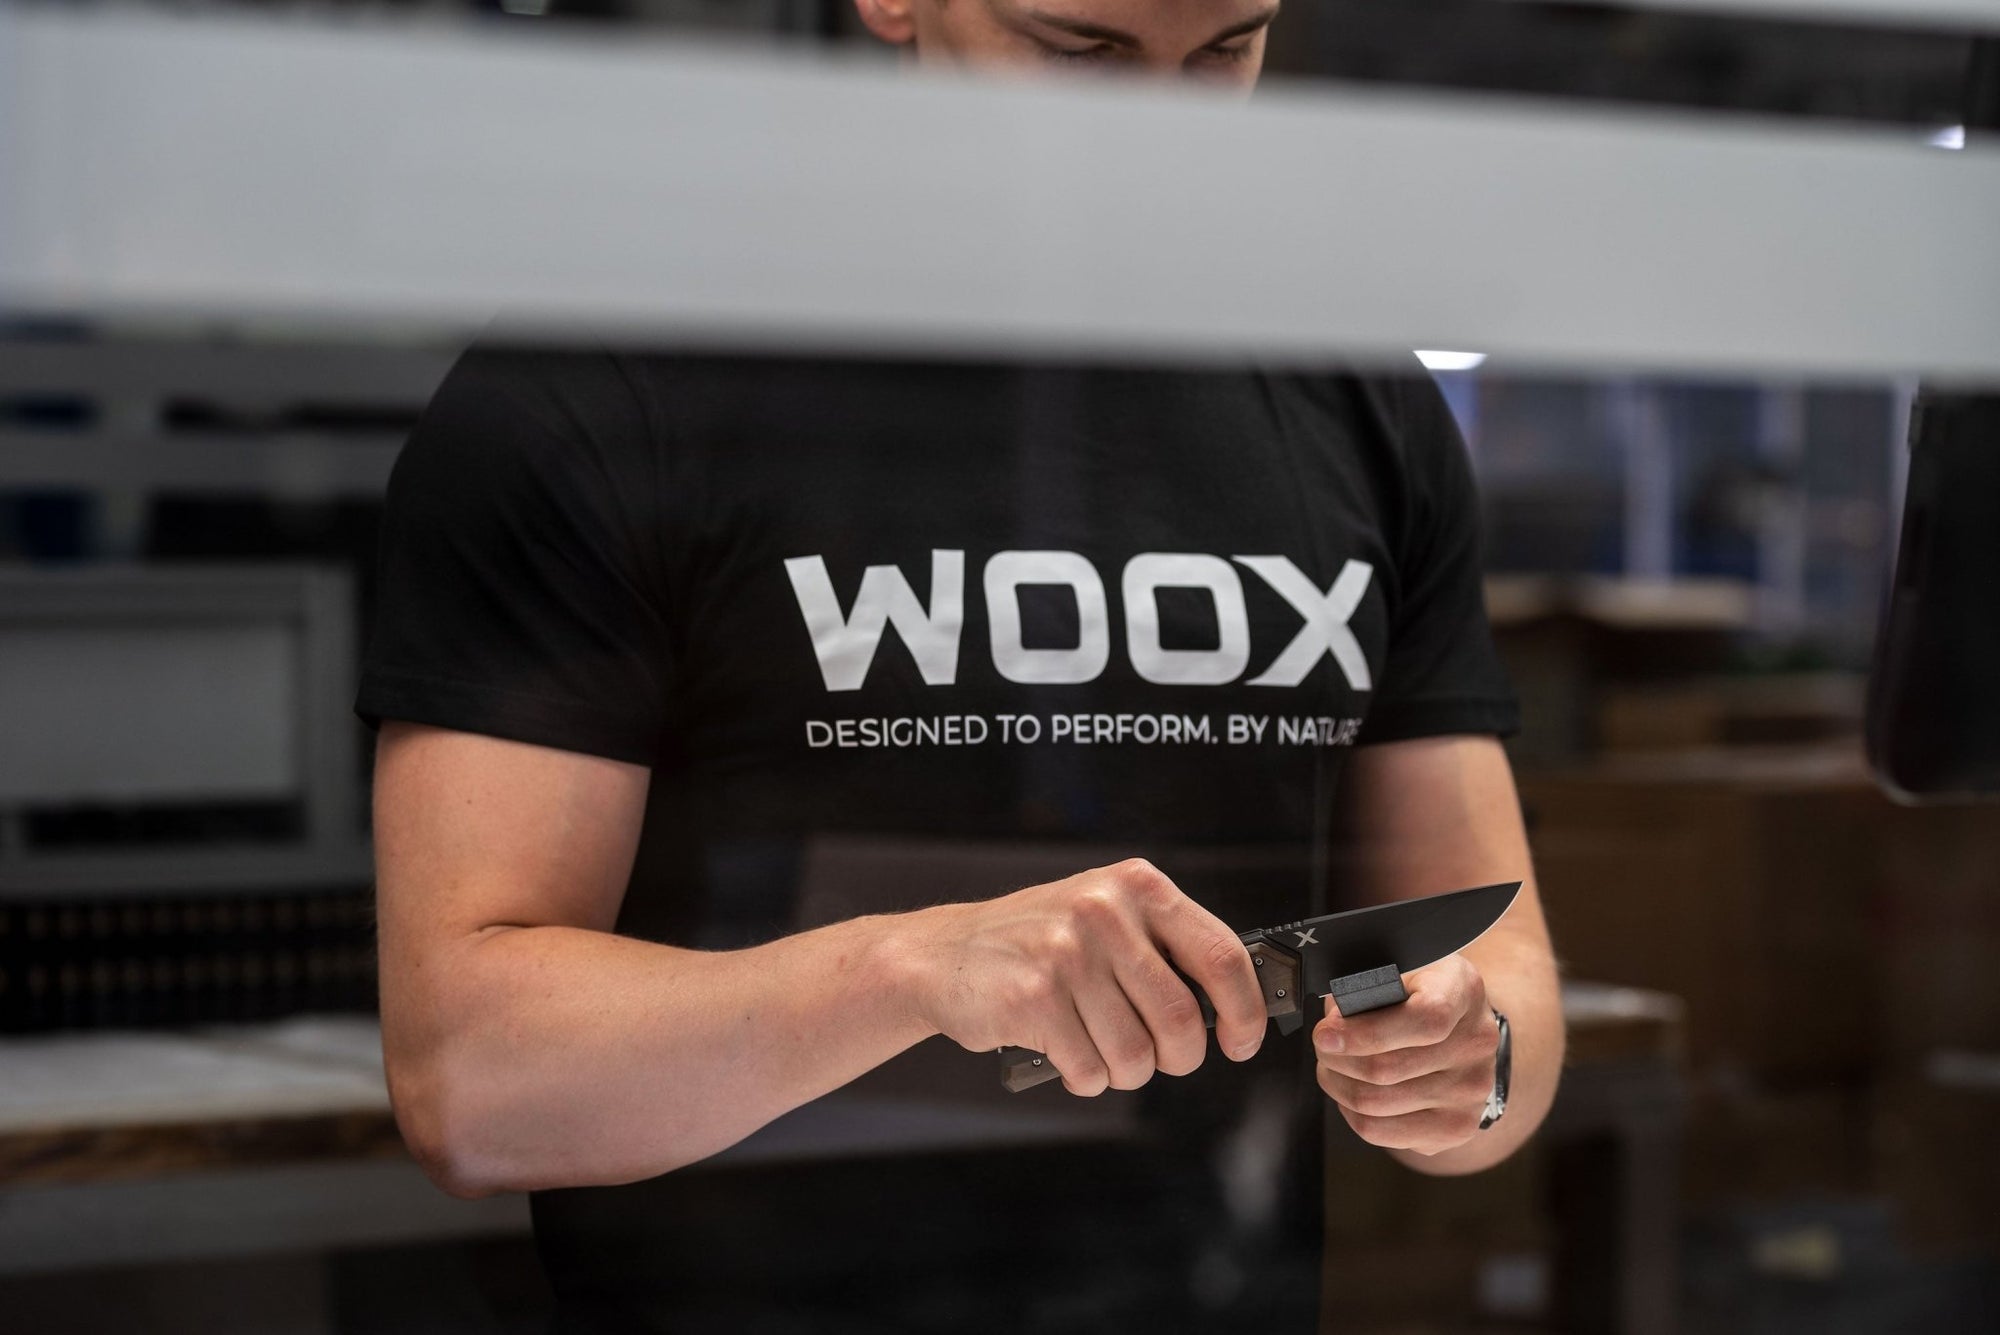 WOOX INTRODUCES 100 YEARS OF SERVICE PROGRAM - WOOX